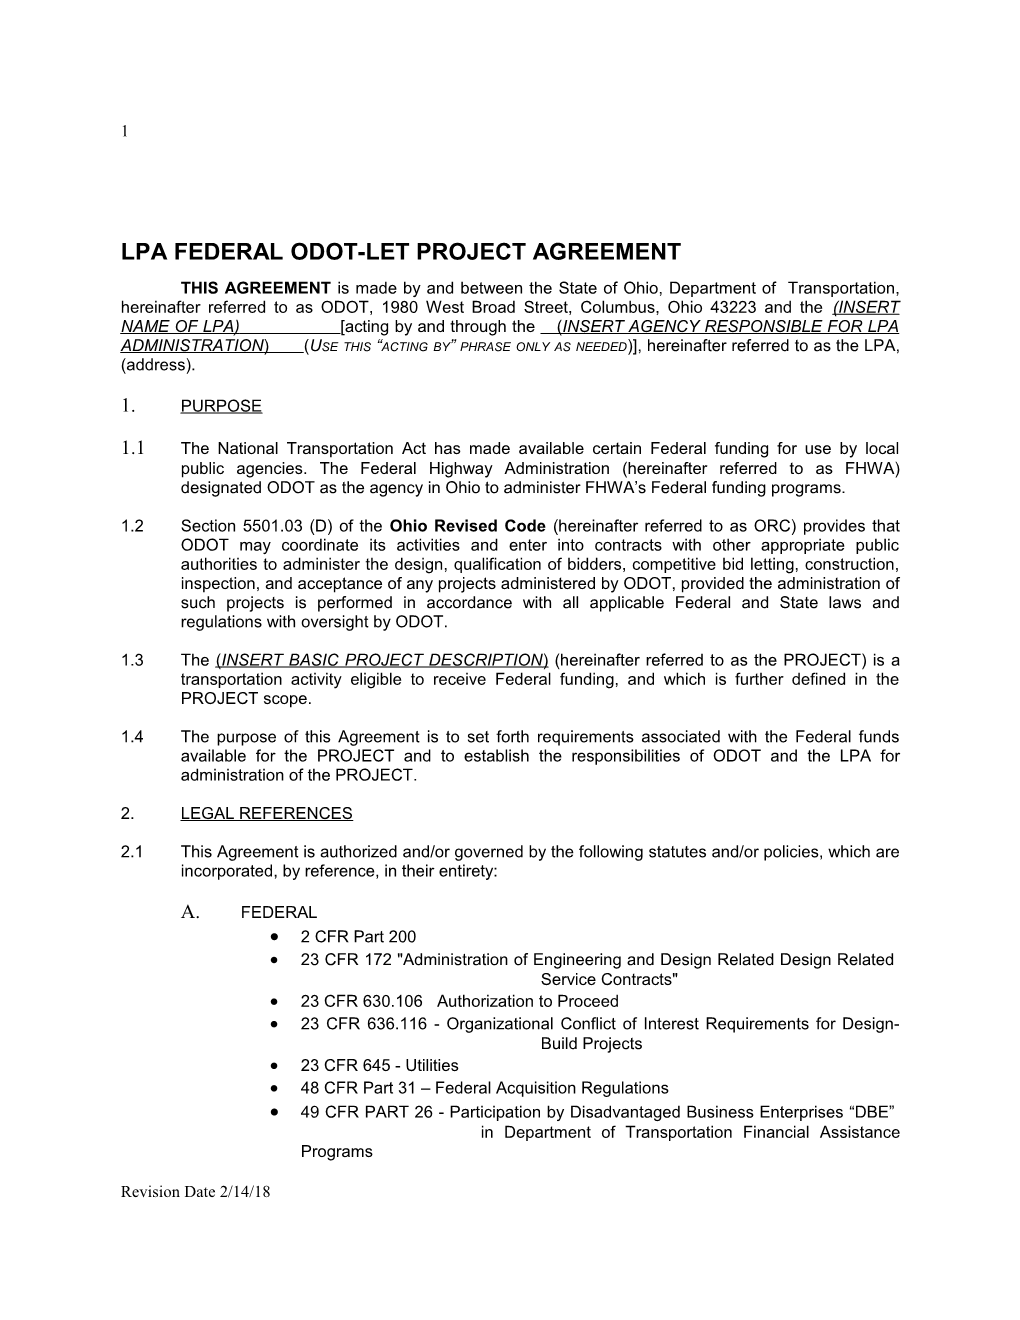 Lpa Federal Odot-Let Project Agreement s1